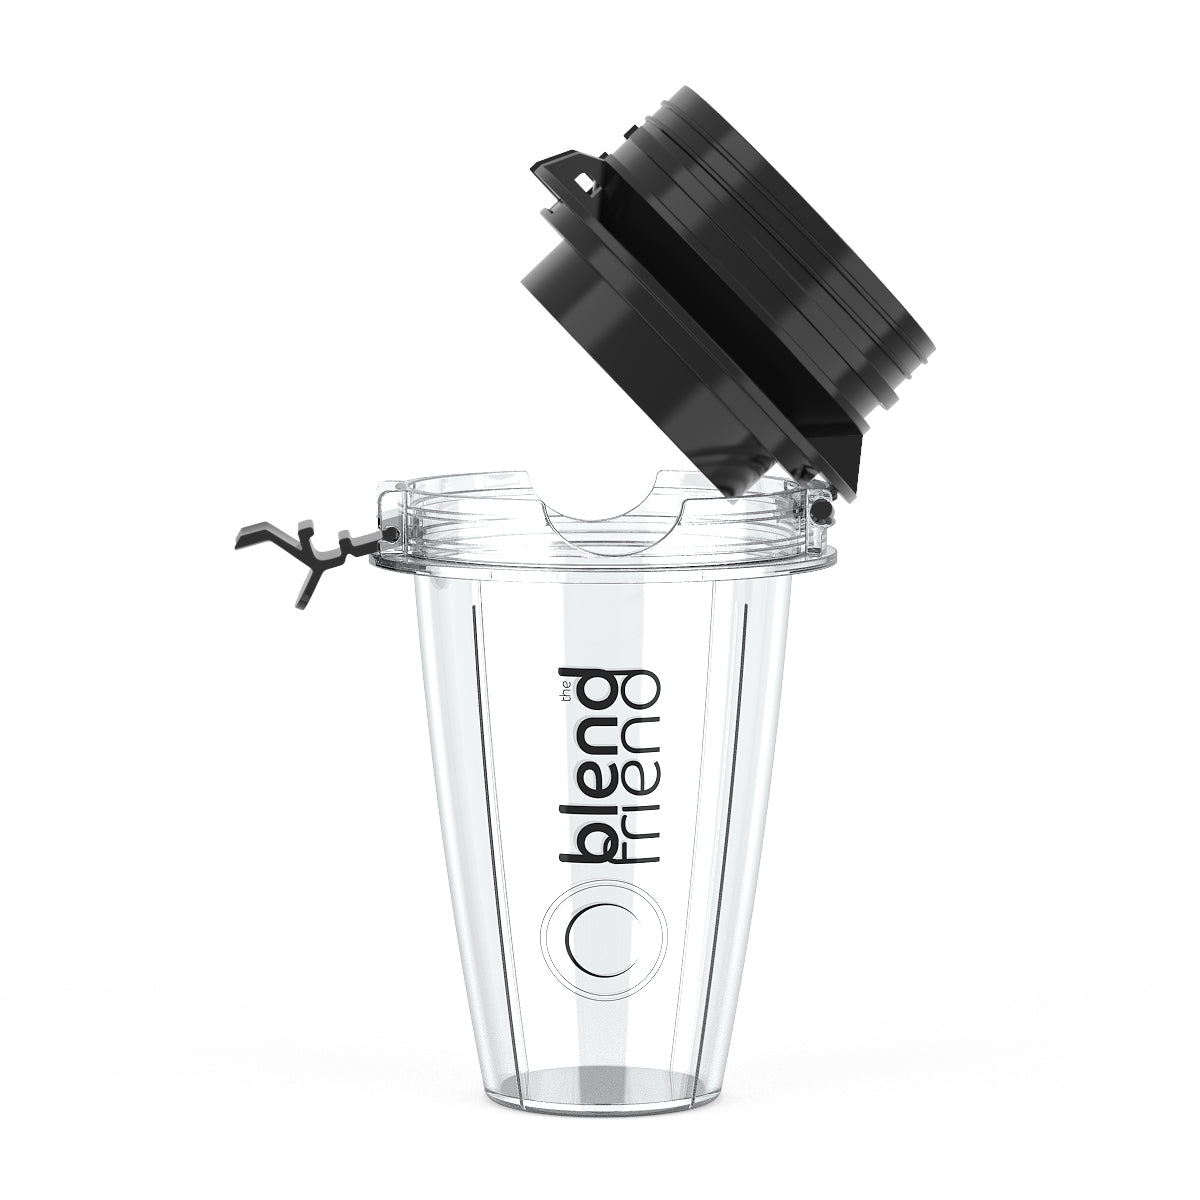 Disposable cup attachment for Ninja Blenders – The Blend Friend